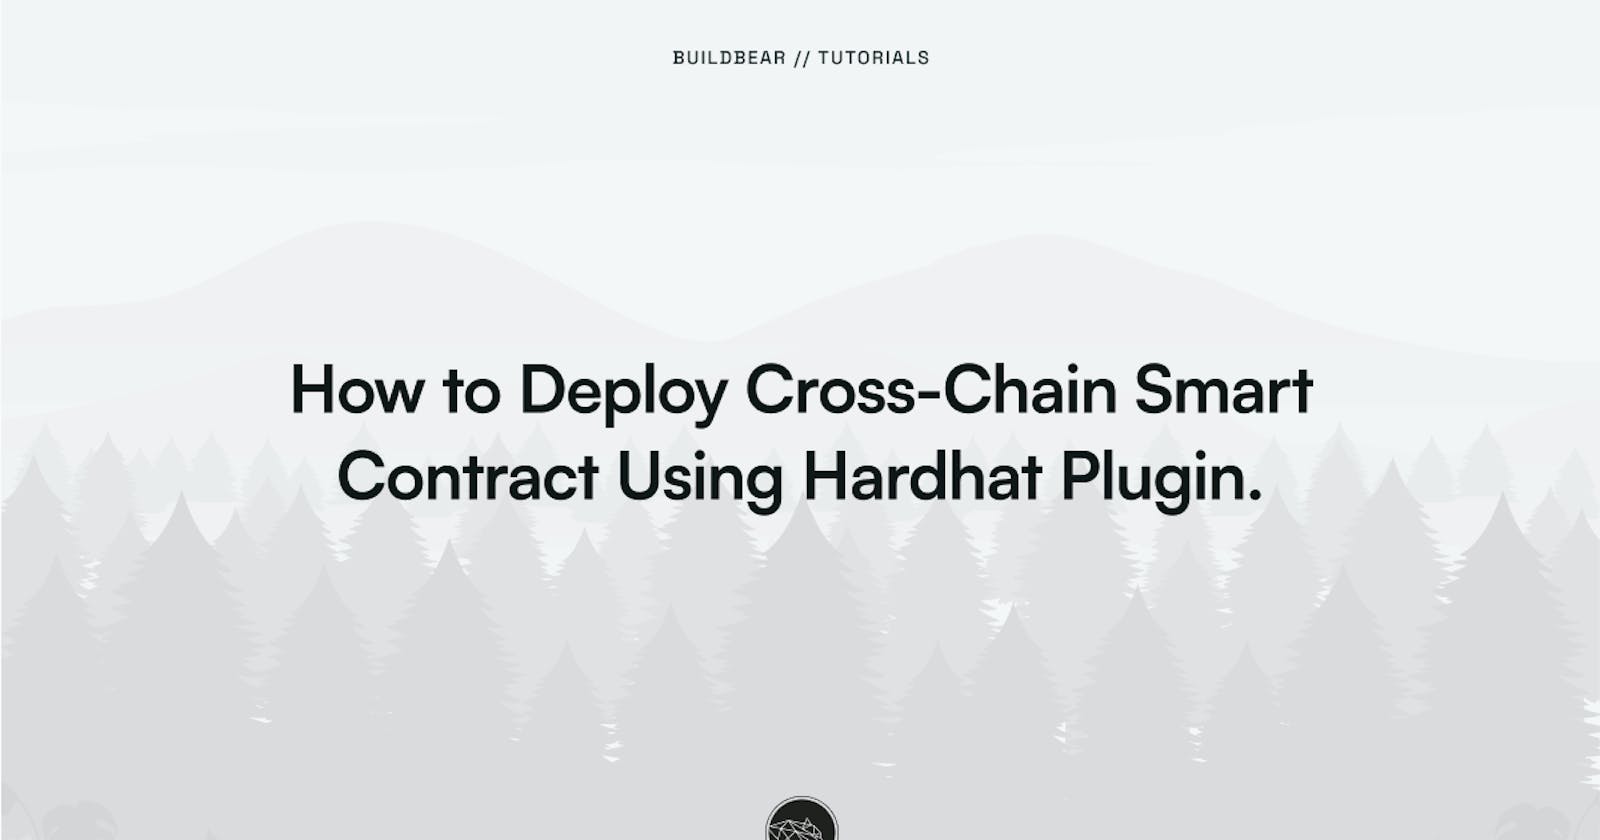 How to Deploy Cross-Chain Smart Contract Using Hardhat Plugin.